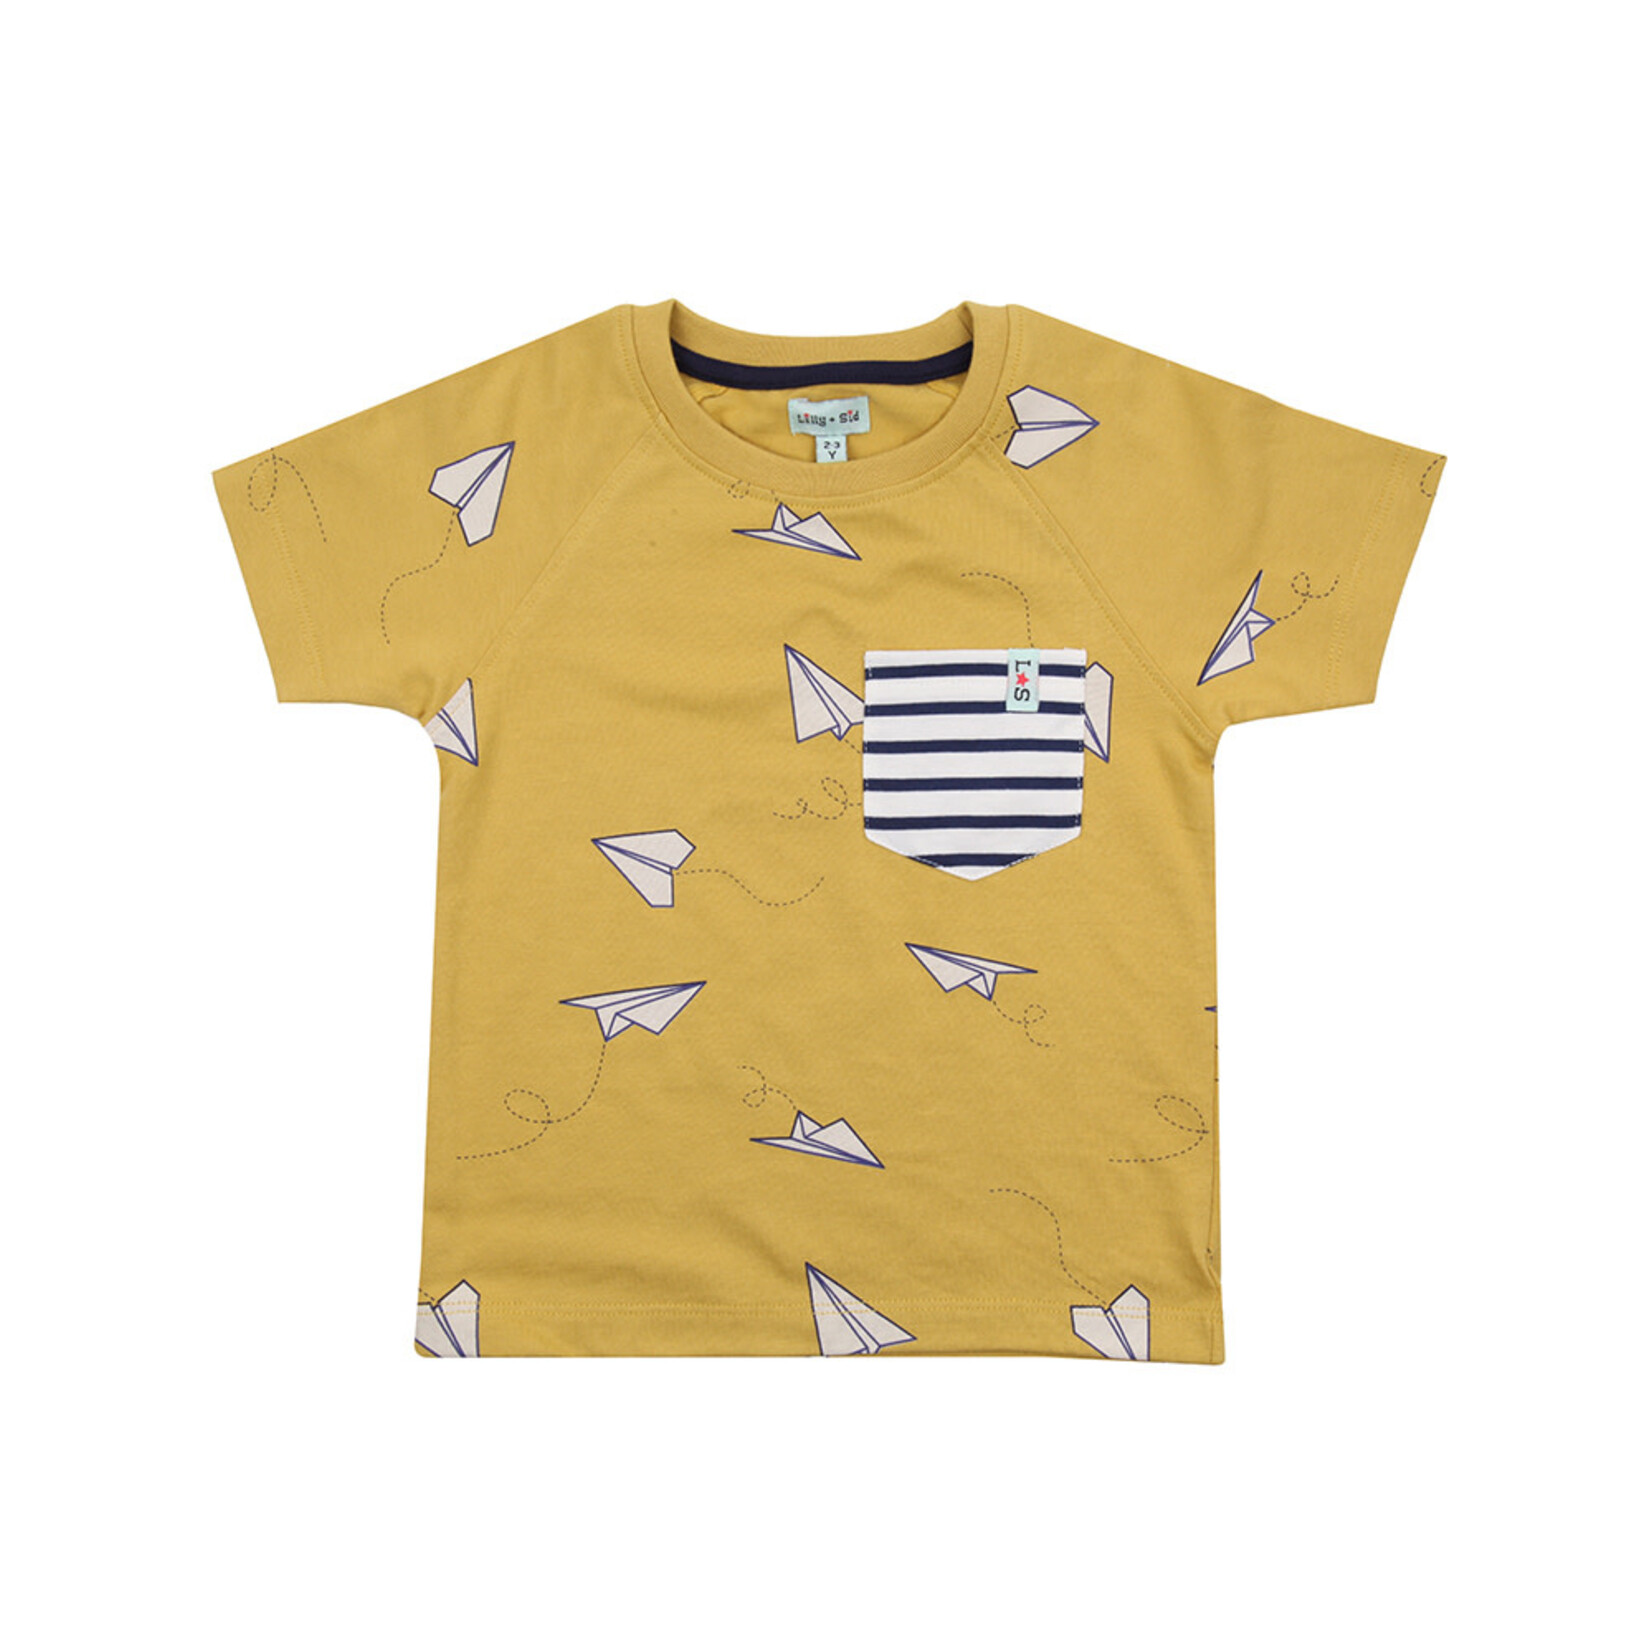 Lilly+Sid LILLY+SID - Mustard Yellow Short Sleeve T-Shirt with Paper Plane Print